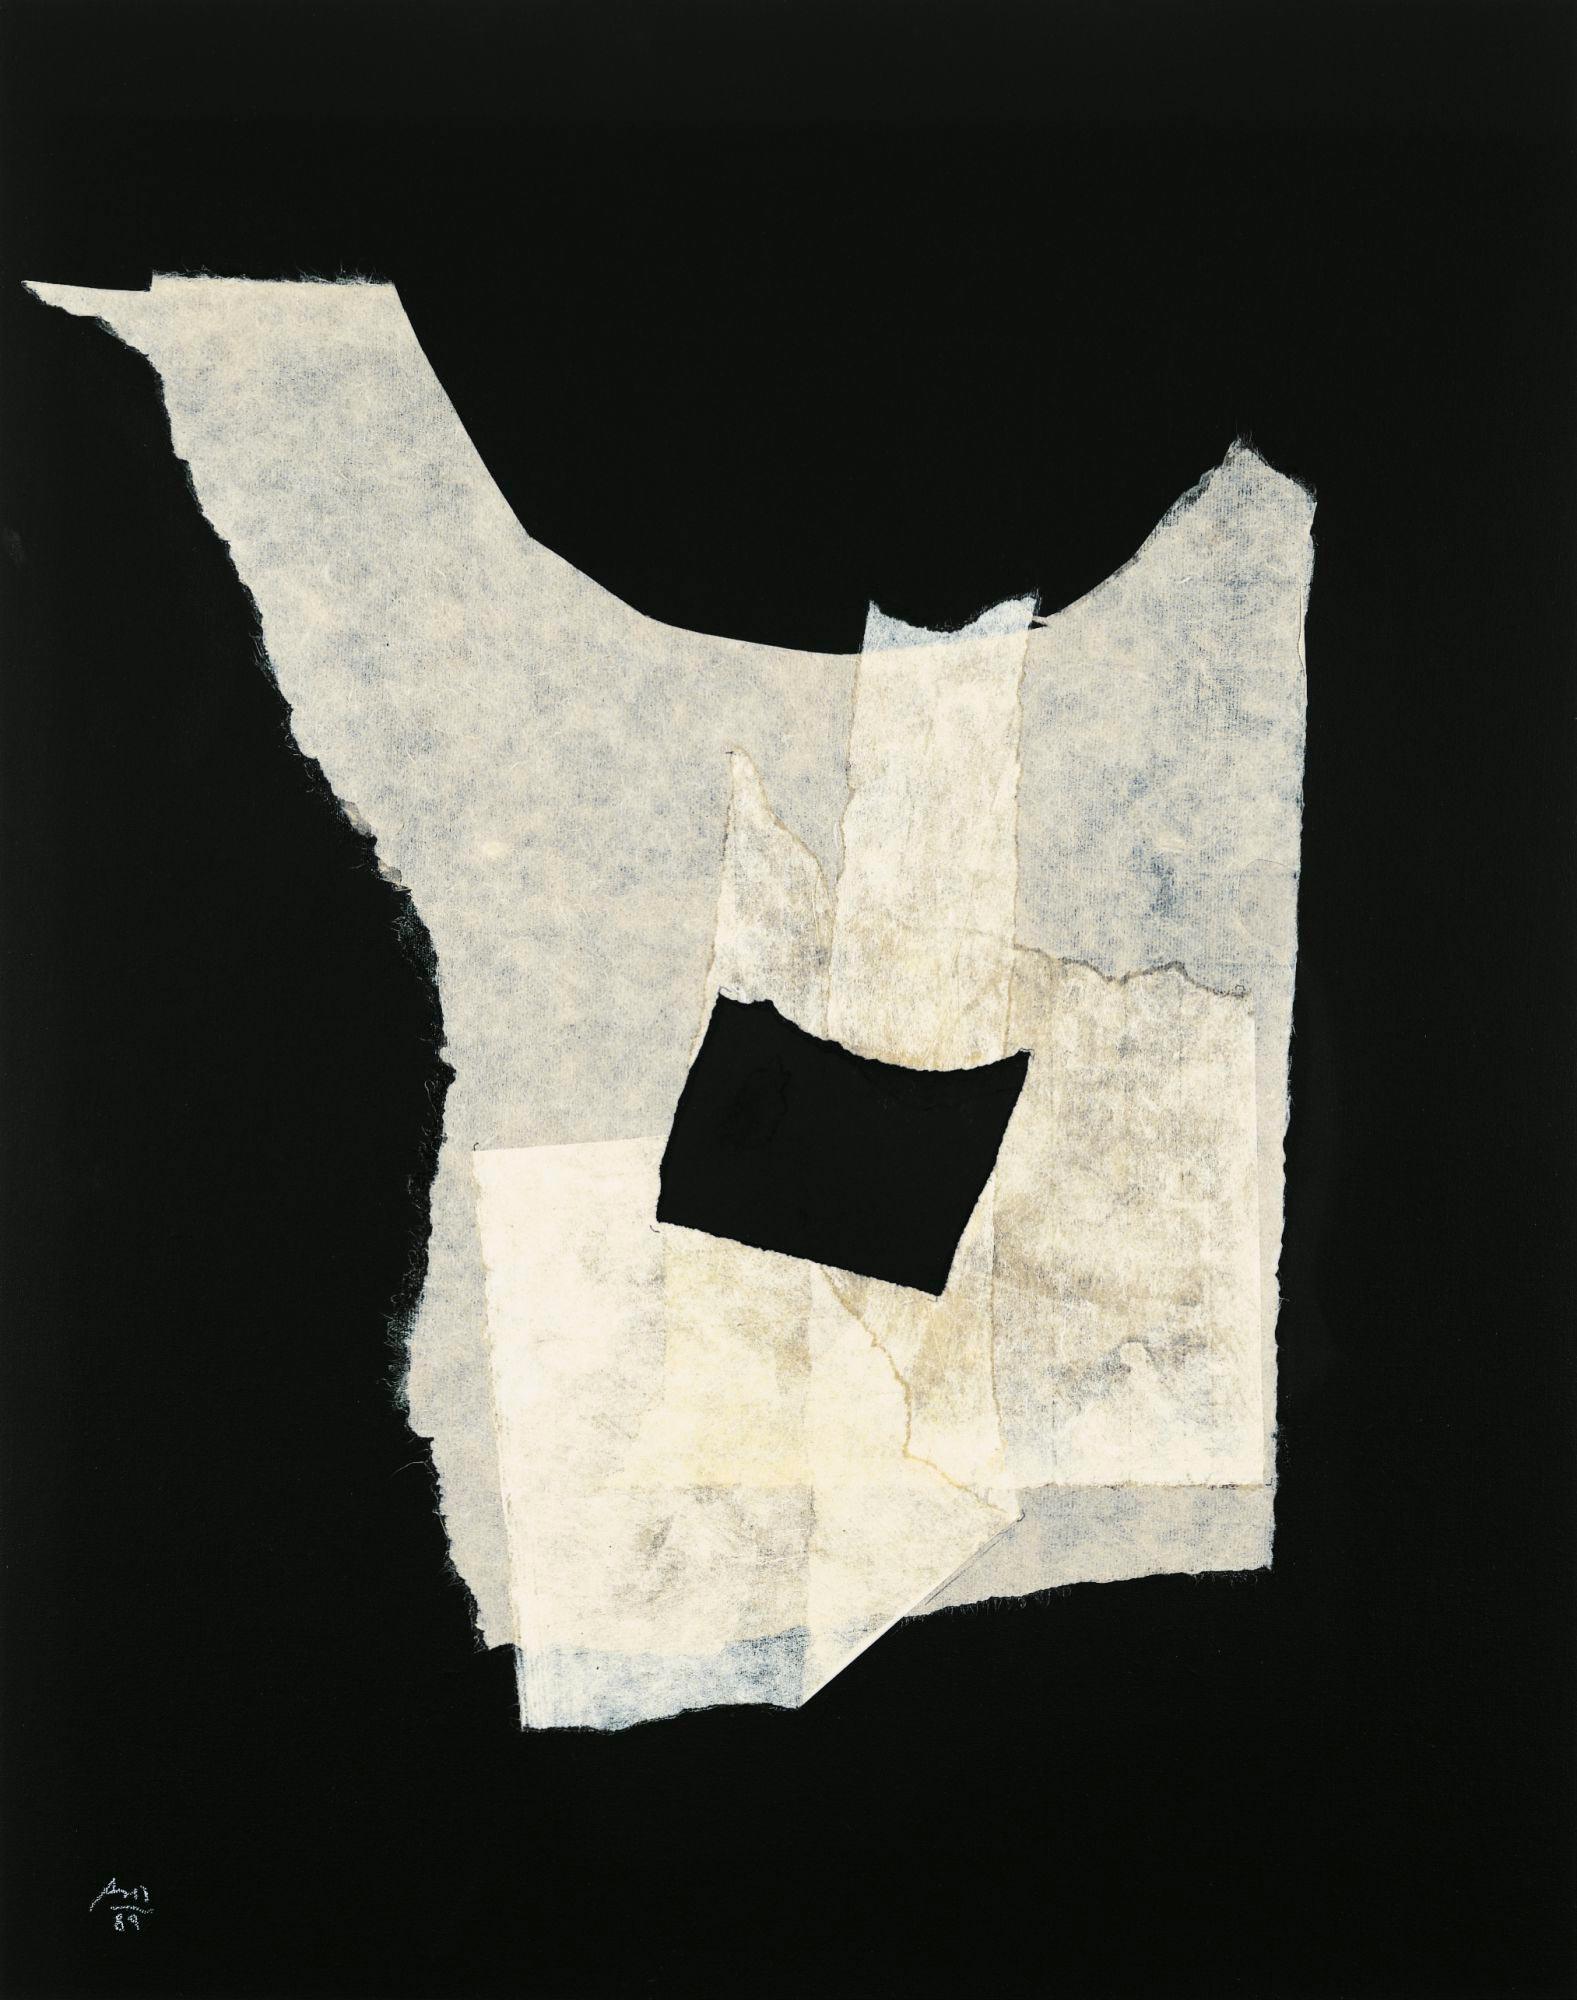 Night Music Opus No. 16, 1988. Acrylic and pasted papers on canvas mounted on board, 32 ½ x 25 ¼ inches (82.6 x 64.1 cm)